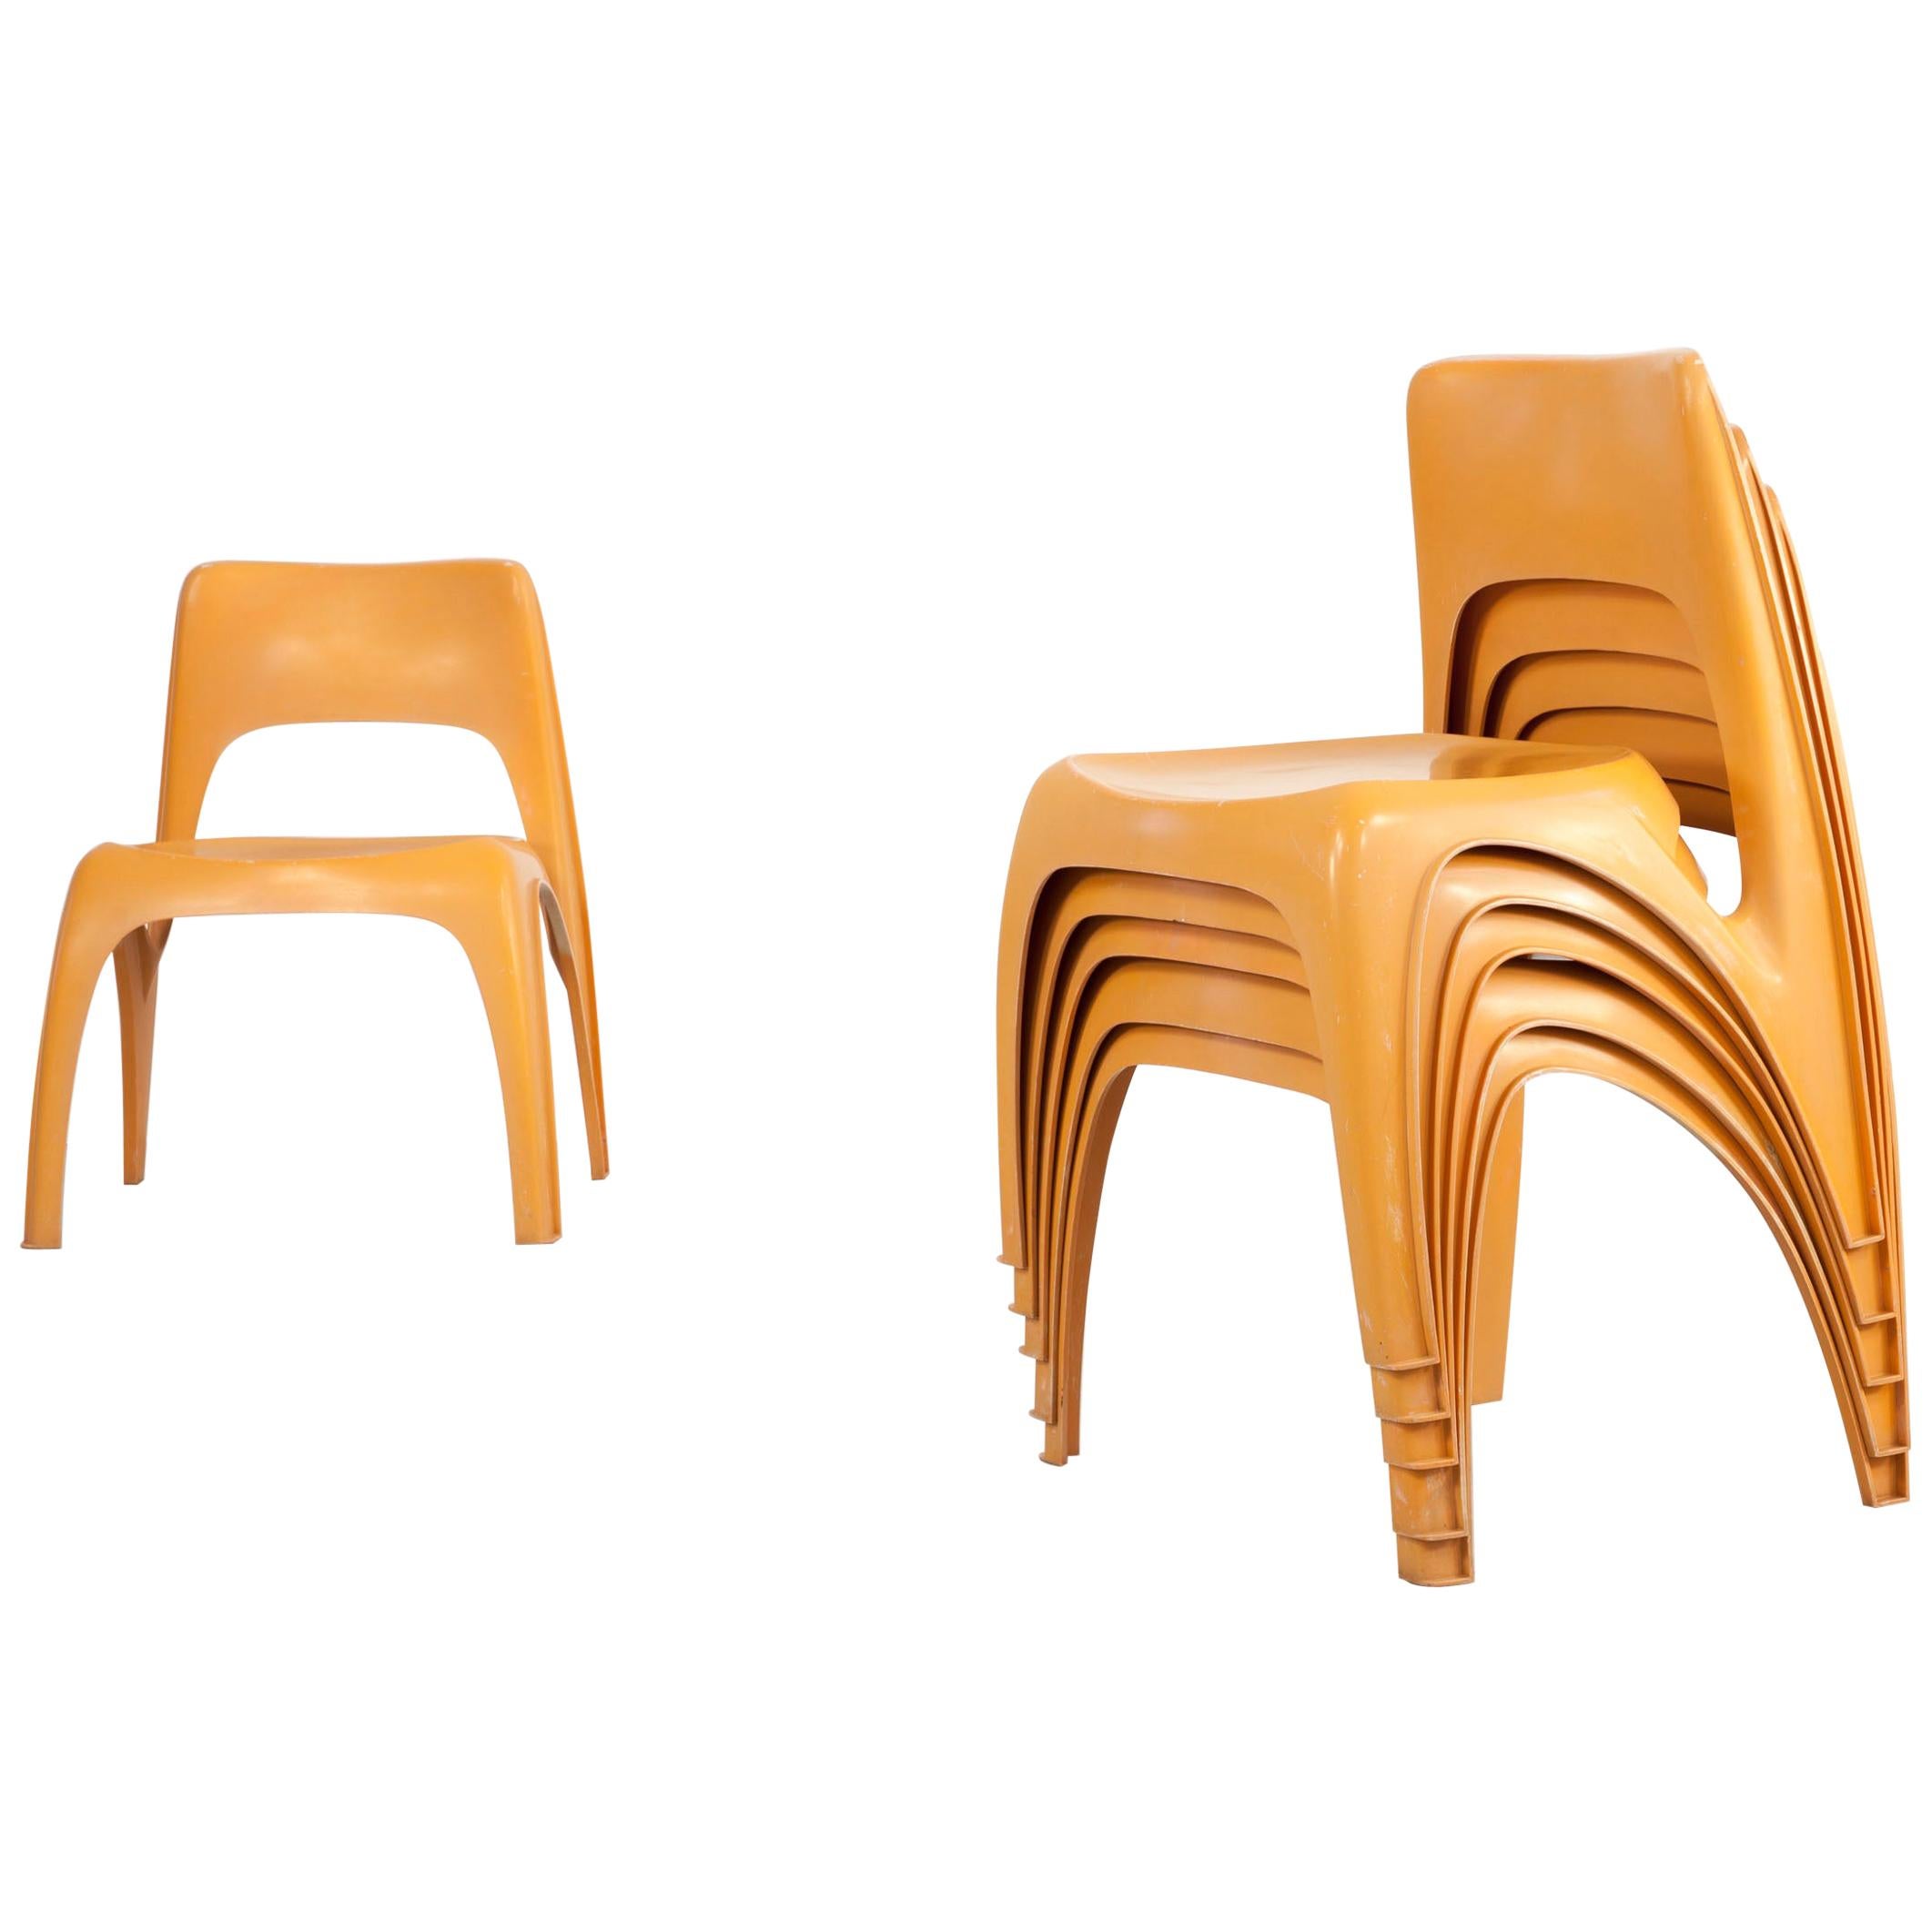 Set of 6 Stackable Chairs, Design by Preben Fabricius, by Interplast, Germany For Sale